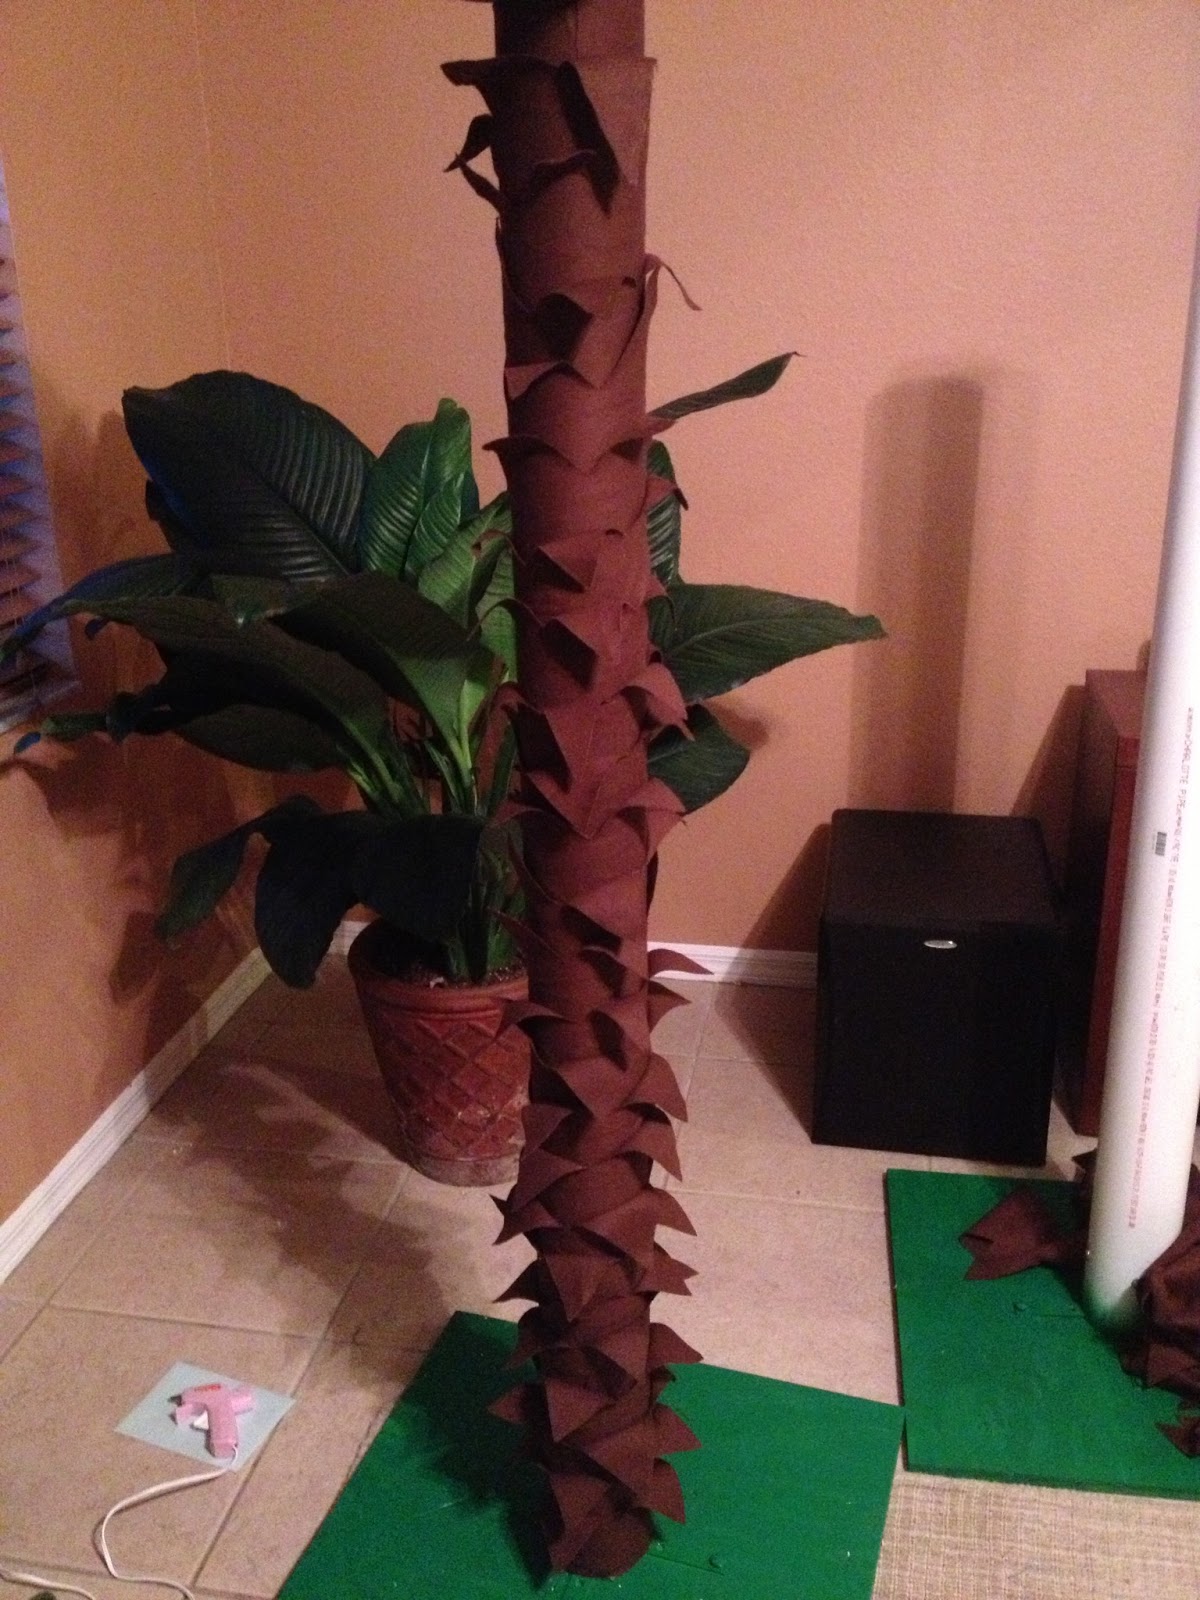 Mrs. Martin's Classroom: Chicka Chicka Boom Boom Custom Tree How To Make A Palm Tree Out Of Pvc Pipe